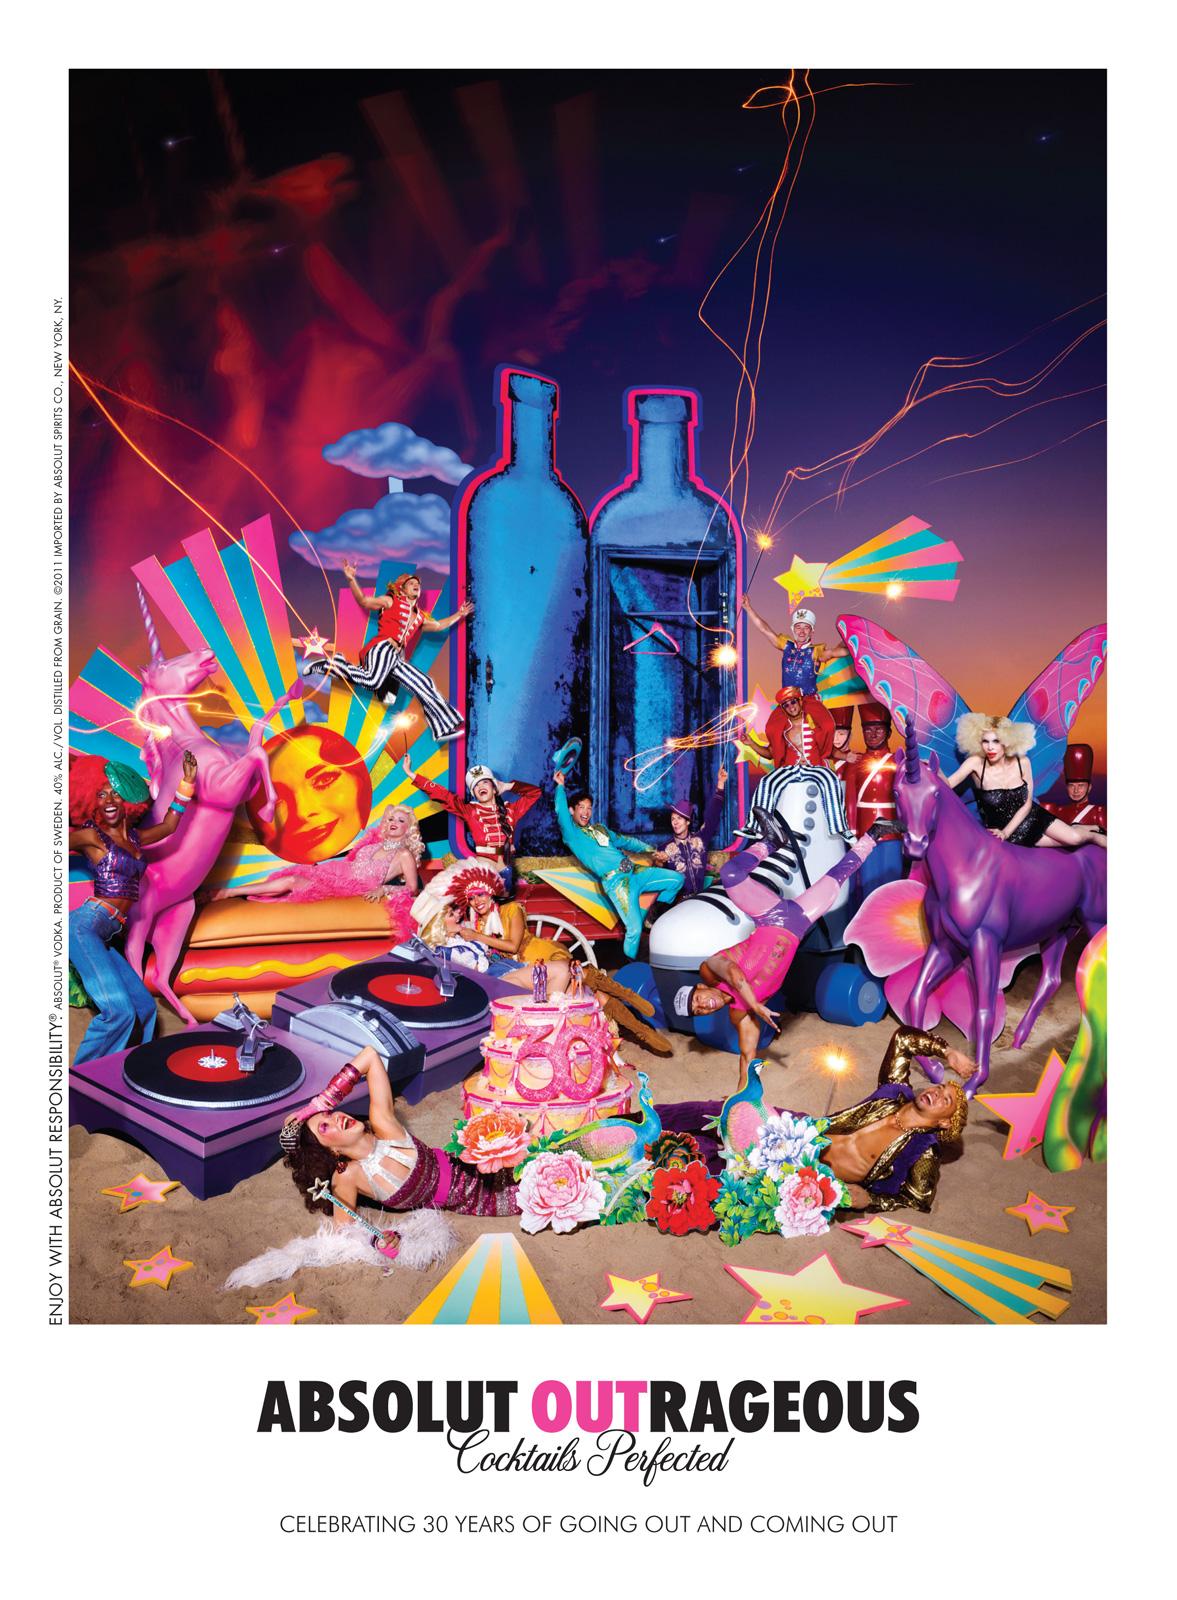 www.lacavalieremasquee.com | TBWA & David LaChapelle for ABSOLUT Outrageous